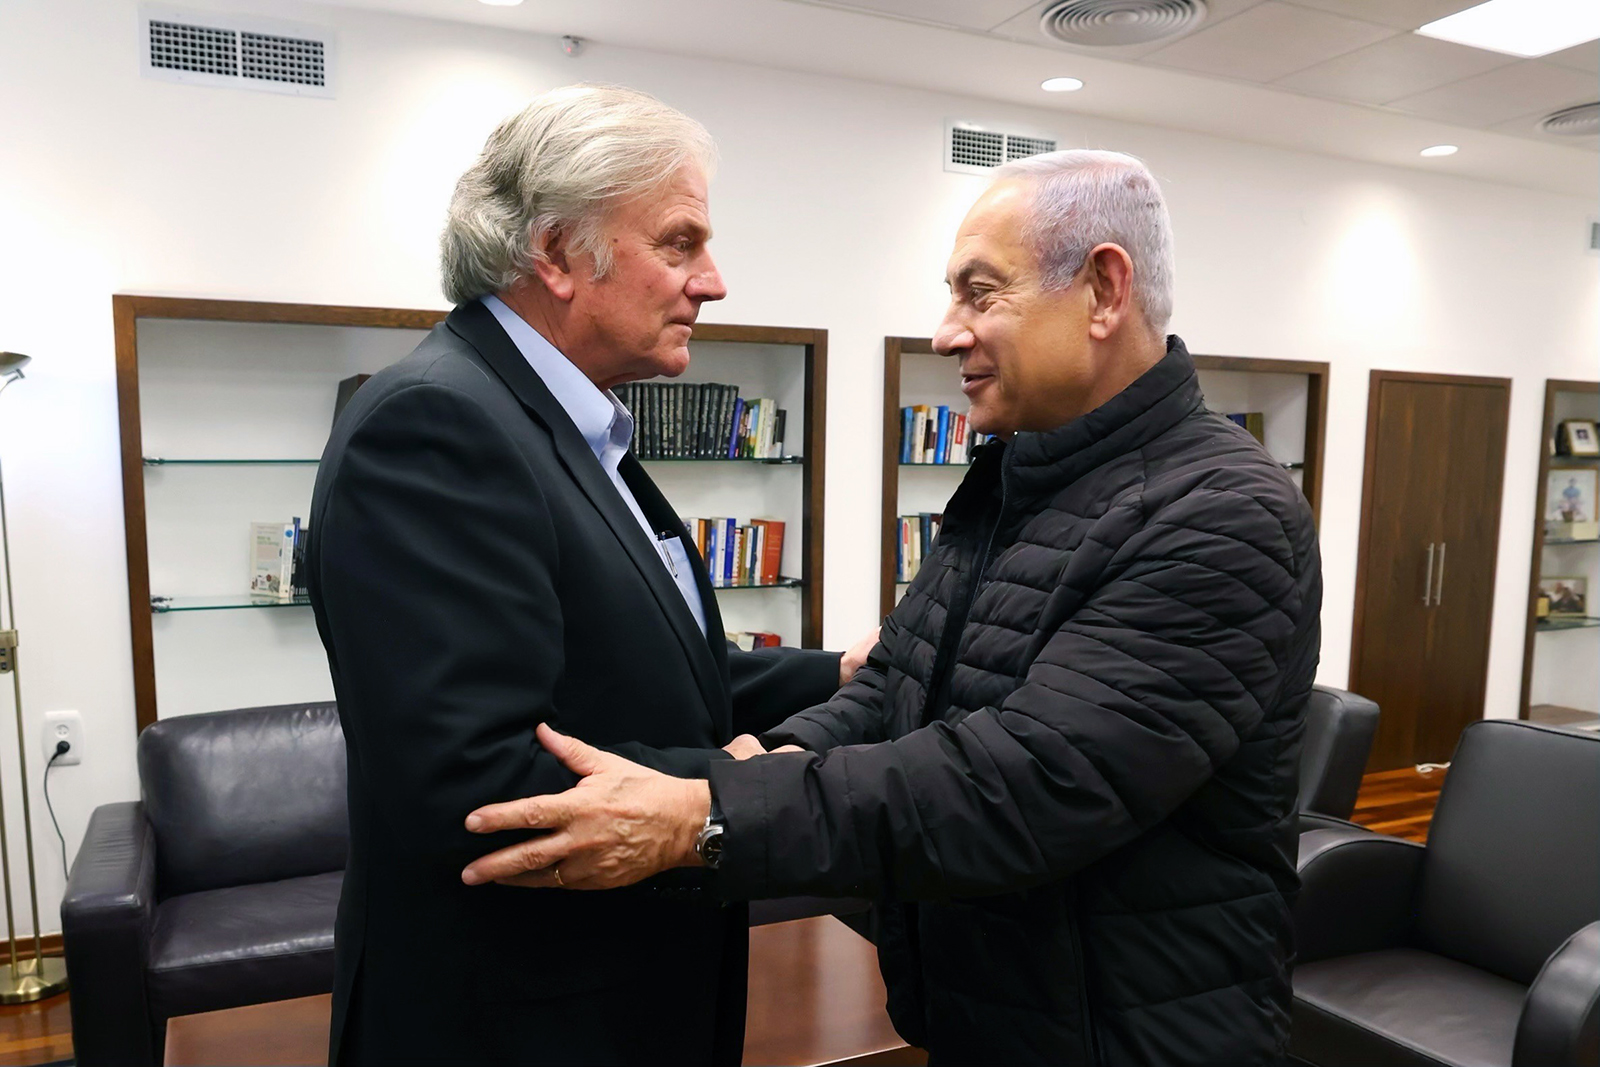 Franklin Graham, left, meets with Israeli Prime Minister Benjamin Netanyahu during a recent visit to Israel. (Photo courtesy of Samaritan’s Purse)